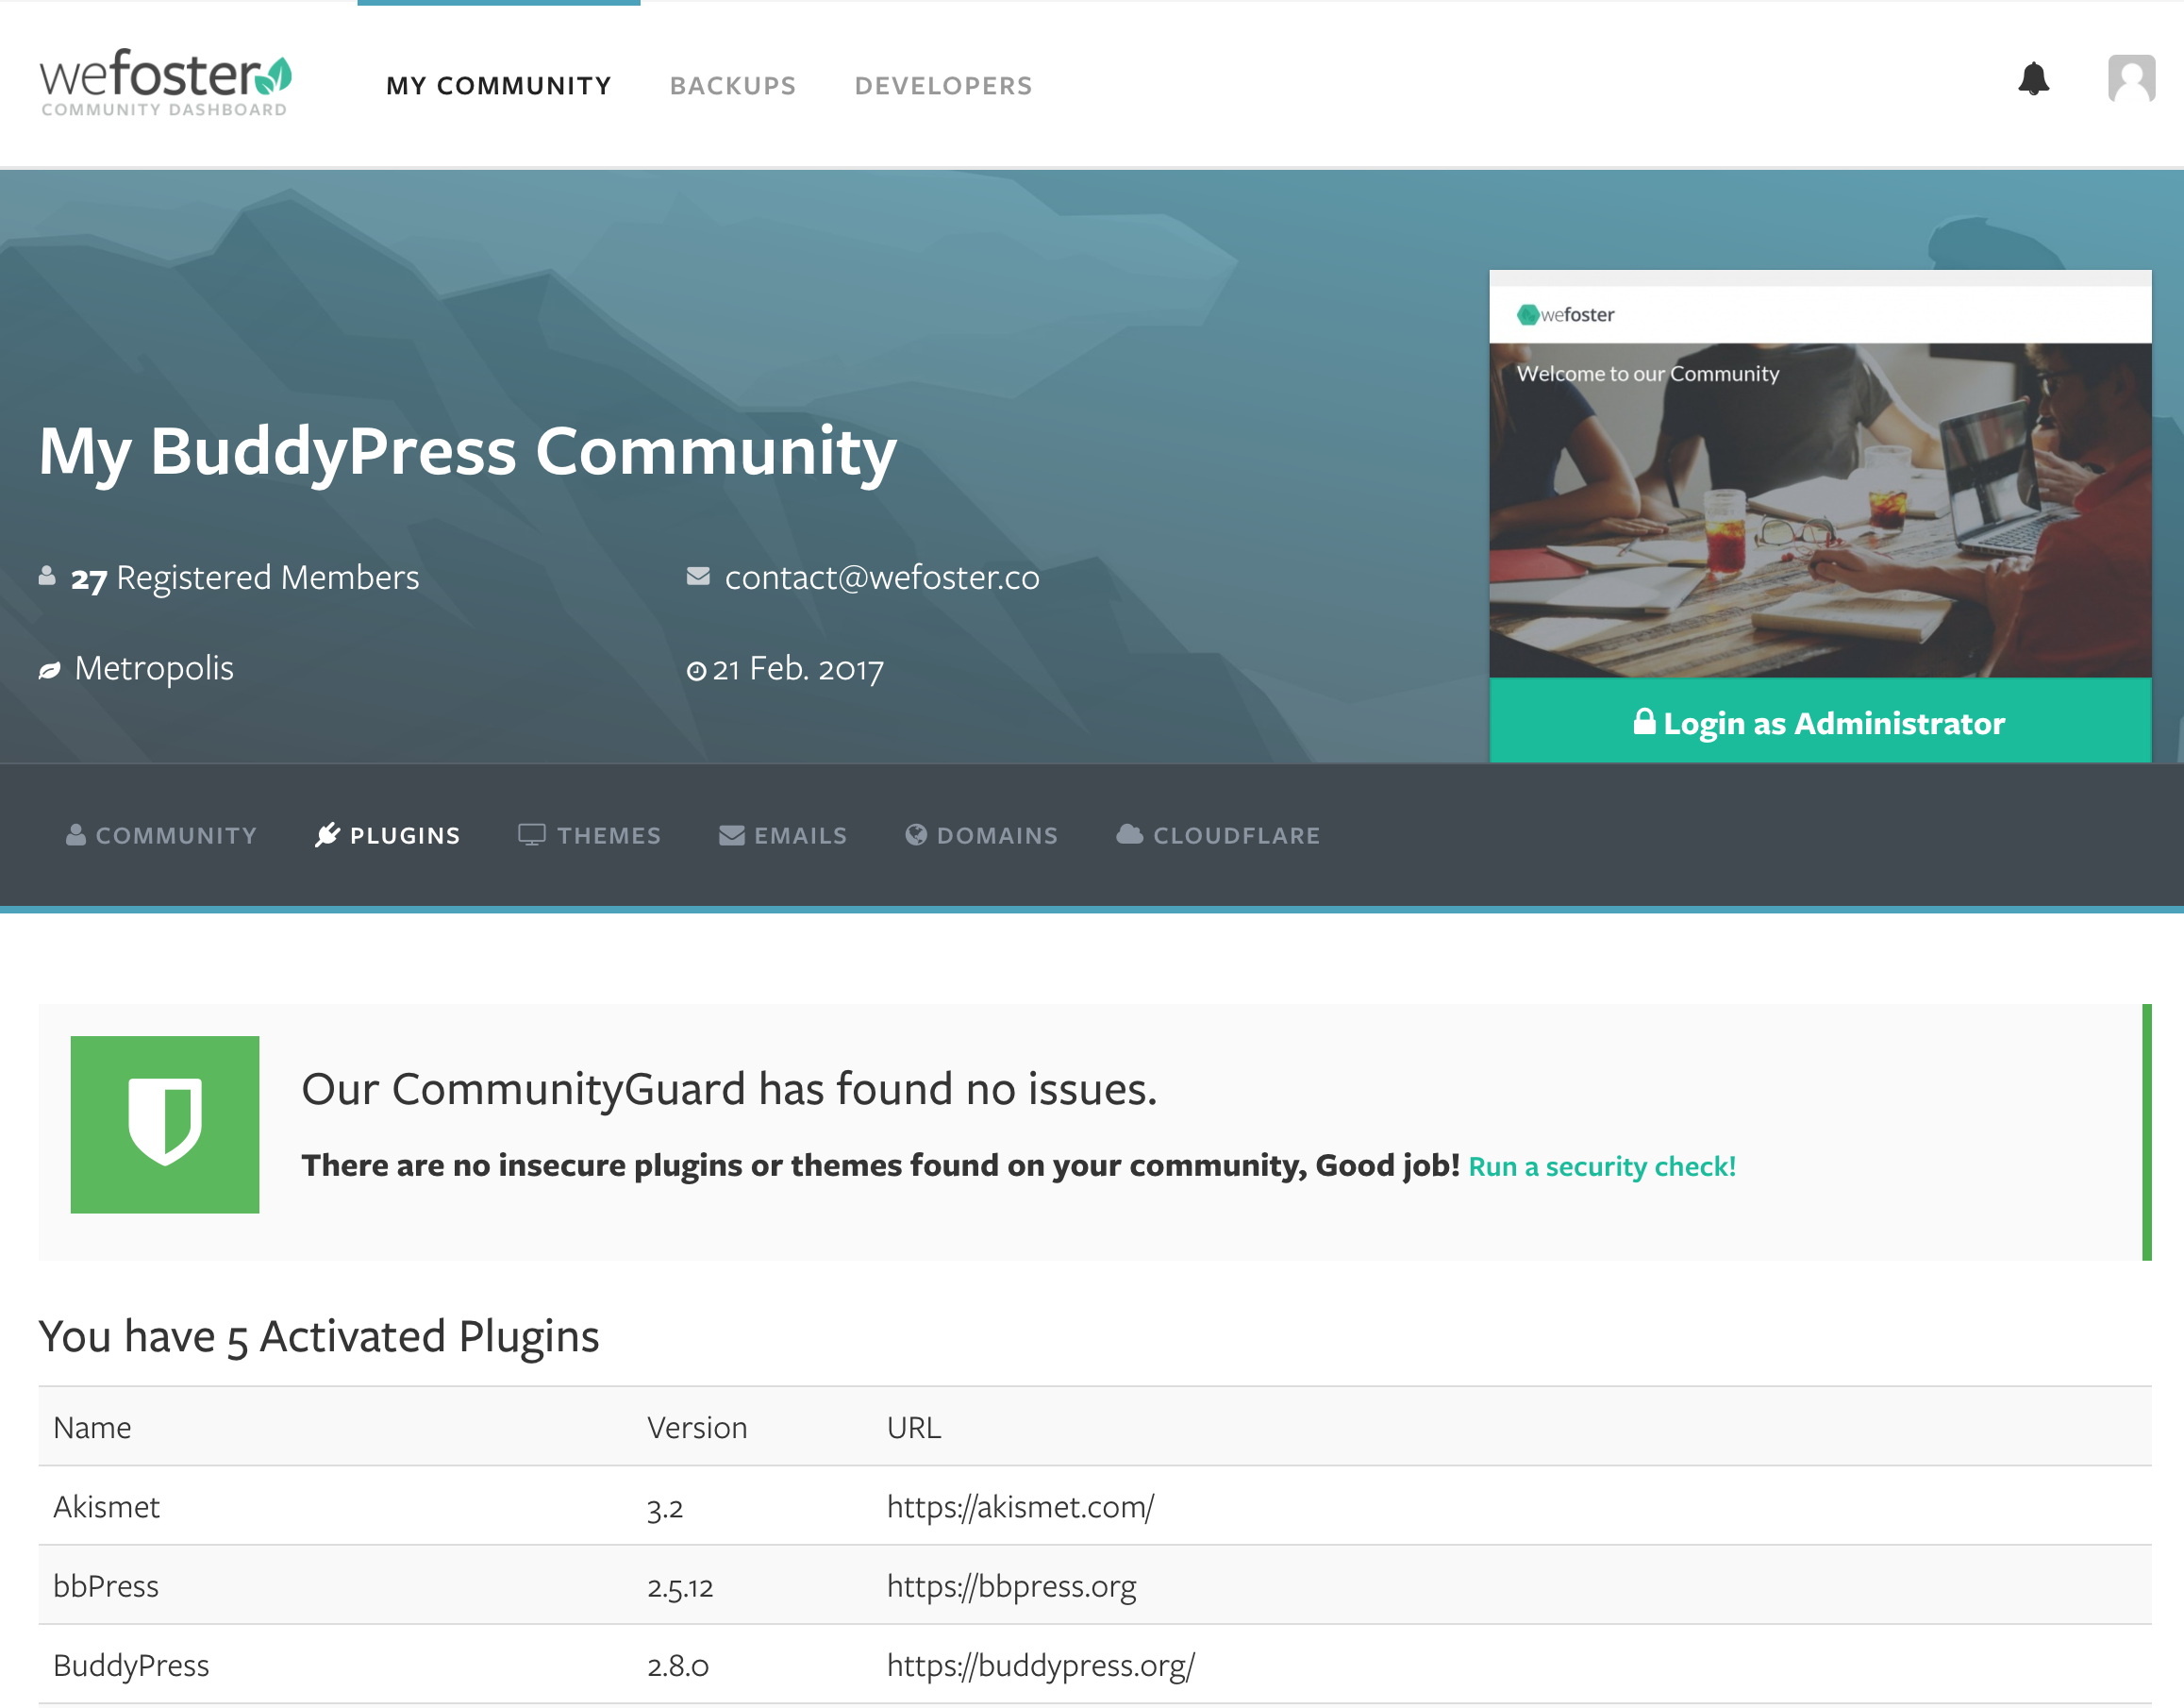 Use your MyWeFoster Community Dashboard to manage your community, see analytics and insights and access our developer tools.